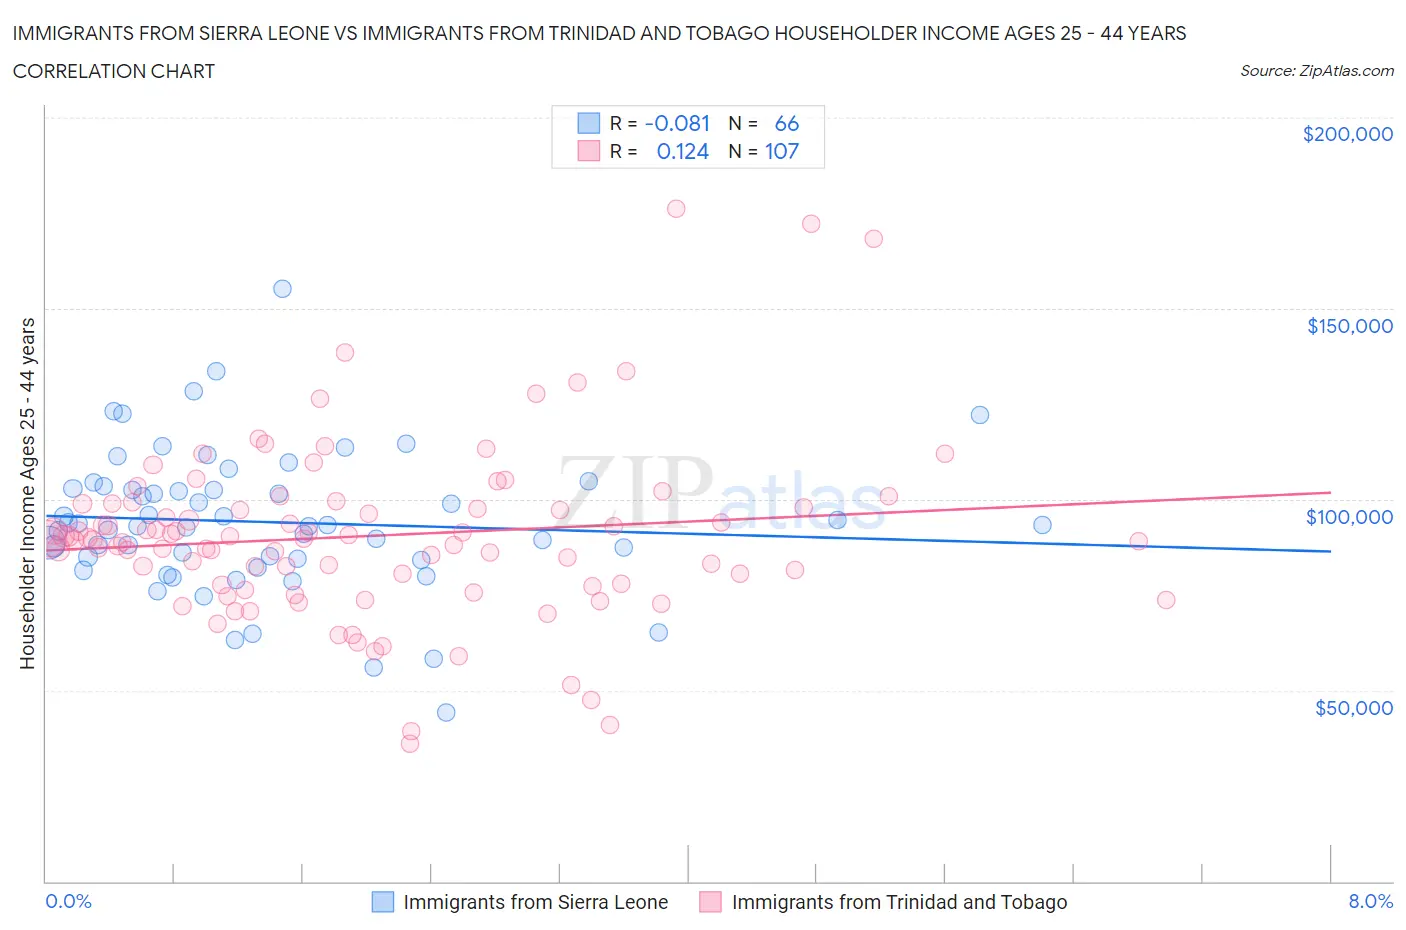 Immigrants from Sierra Leone vs Immigrants from Trinidad and Tobago Householder Income Ages 25 - 44 years